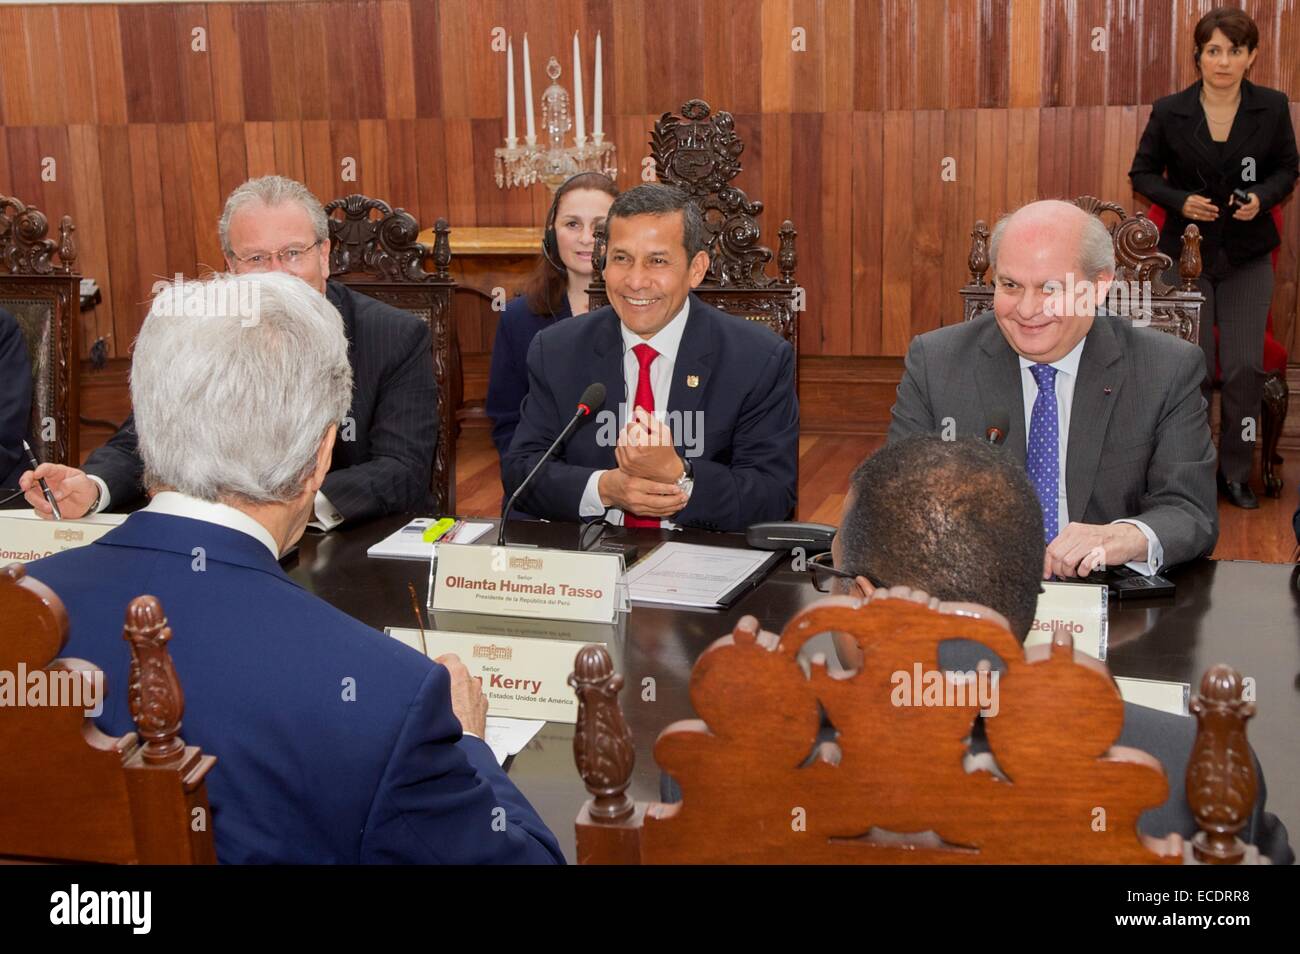 US Secretary of State John Kerry meets with Peruvian President Ollanta Humala following the 20th session of the United Nations Framework Convention on Climate Change December 11, 2014 in Lima, Peru. Stock Photo